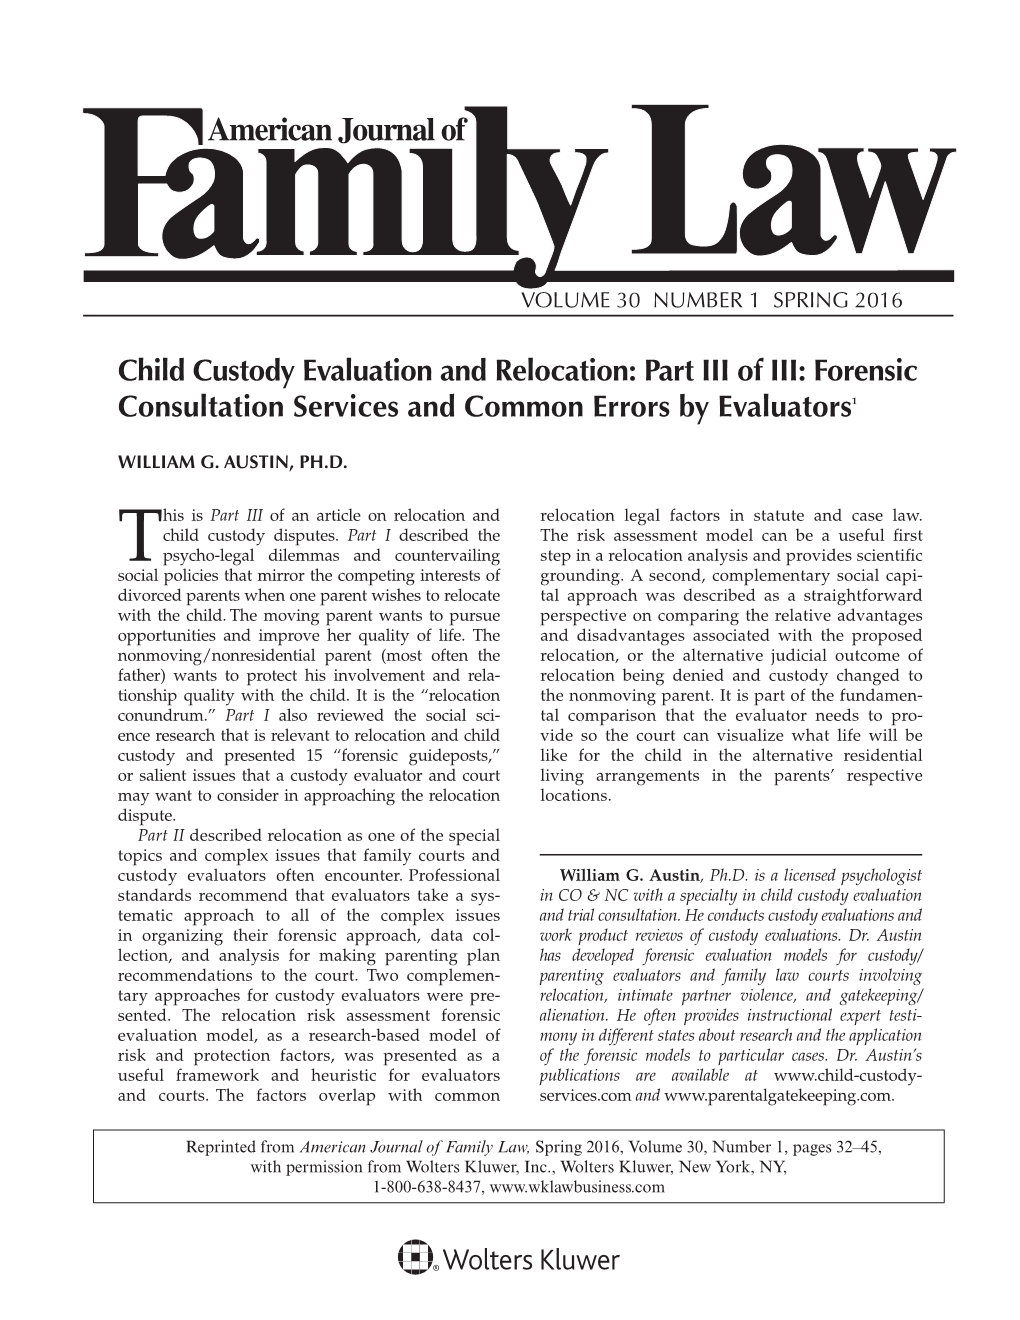 Child Custody Evaluation and Relocation: Part III of III: Forensic Consultation Services and Common Errors by Evaluators1